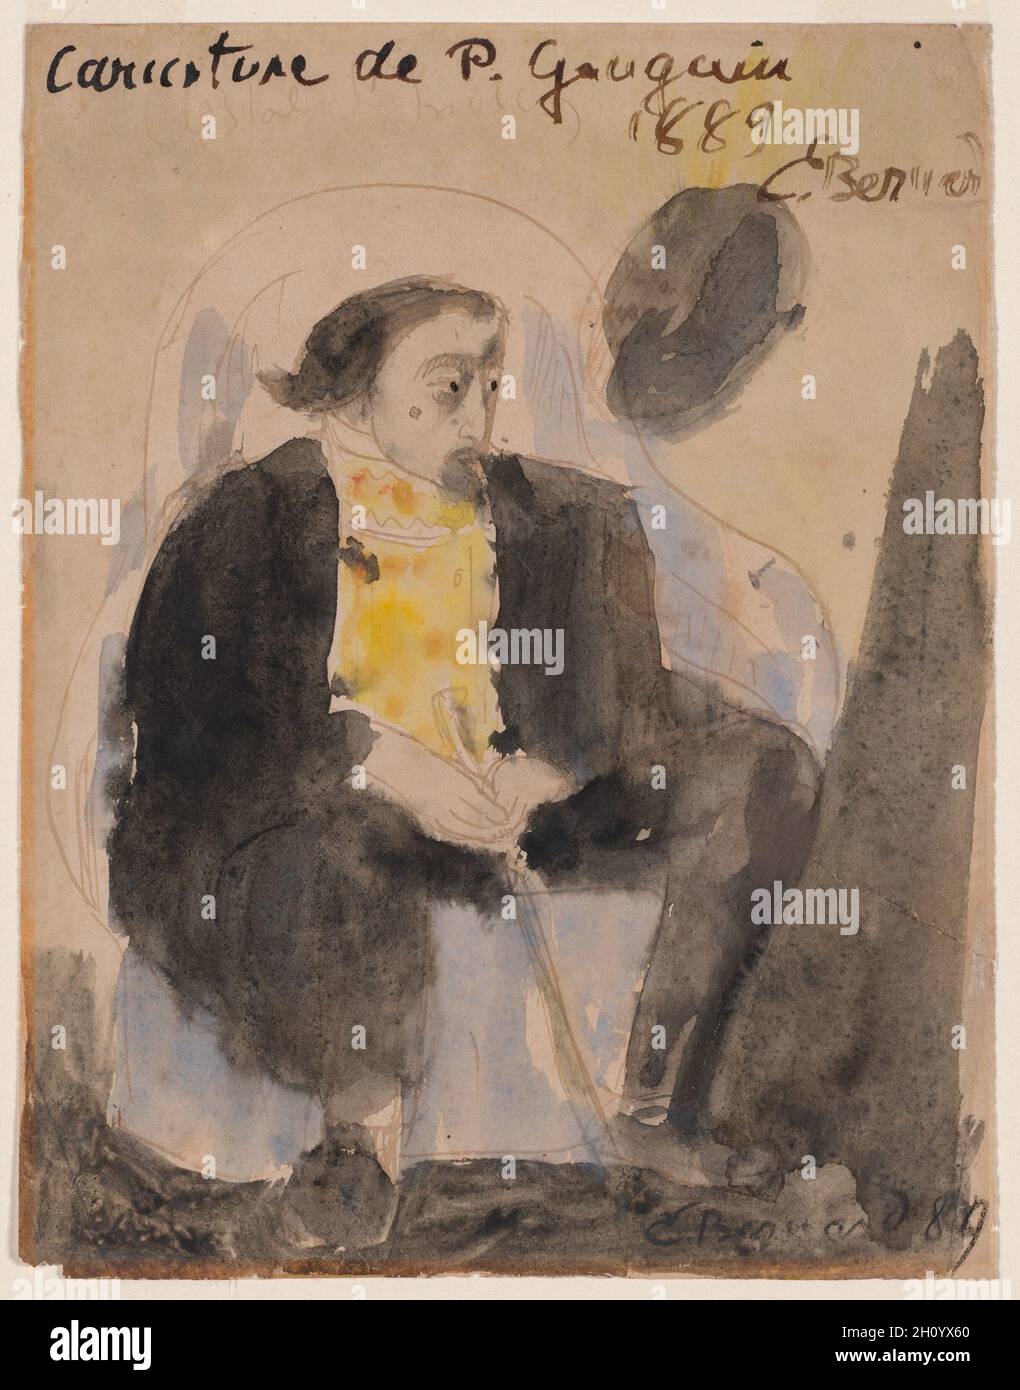 Caricature of Paul Gauguin, 1889. Émile Bernard (French, 1868-1941). Watercolor and black ink on paper; sheet: 19.9 x 15.5 cm (7 13/16 x 6 1/8 in.).  Émile Bernard worked closely with Paul Gauguin in the village of Pont-Aven during the late 1880s, adopting a new style that emphasized imagination rather than observed reality. This caricatural portrait dates to their most intense period of collaboration, and shows Gauguin as the leader of a new school of painting, seated regally and holding a walking stick that resembles a scepter. Stock Photo